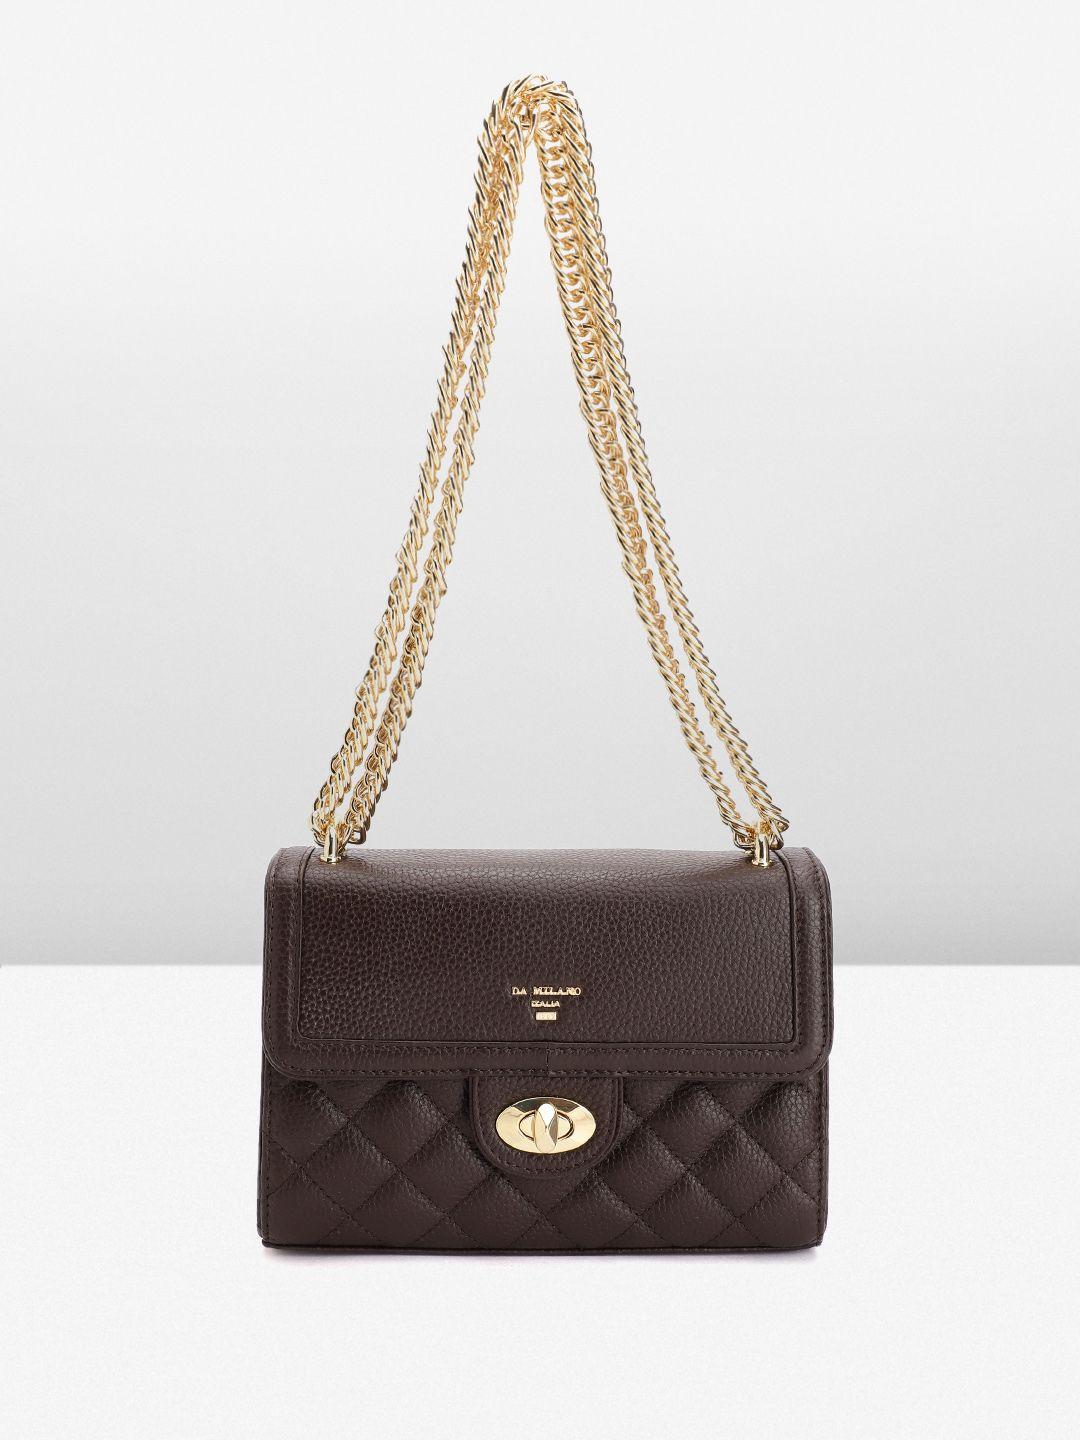 da milano leather structured shoulder bag with quilted detail